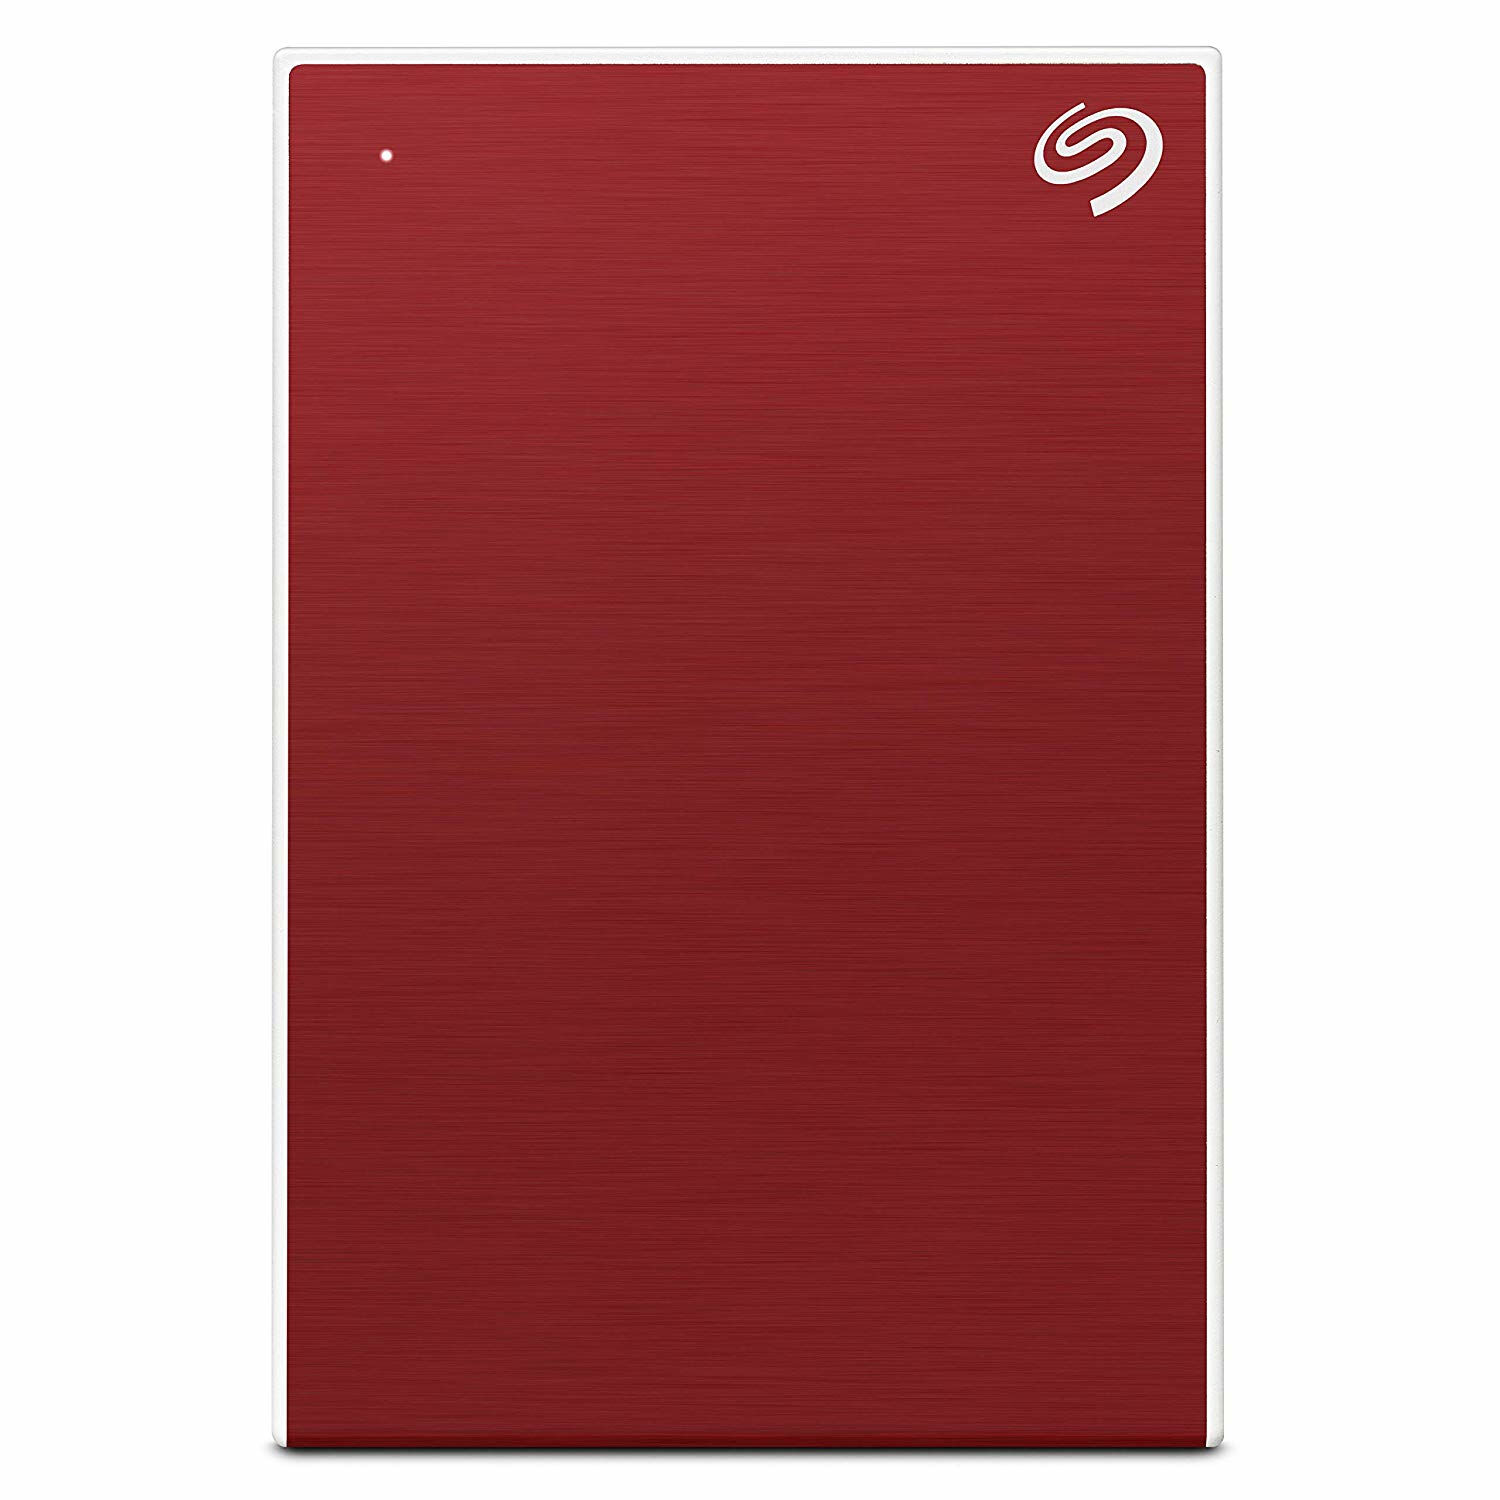 Seagate Backup Plus 4TB USB3.0 2.5in Red